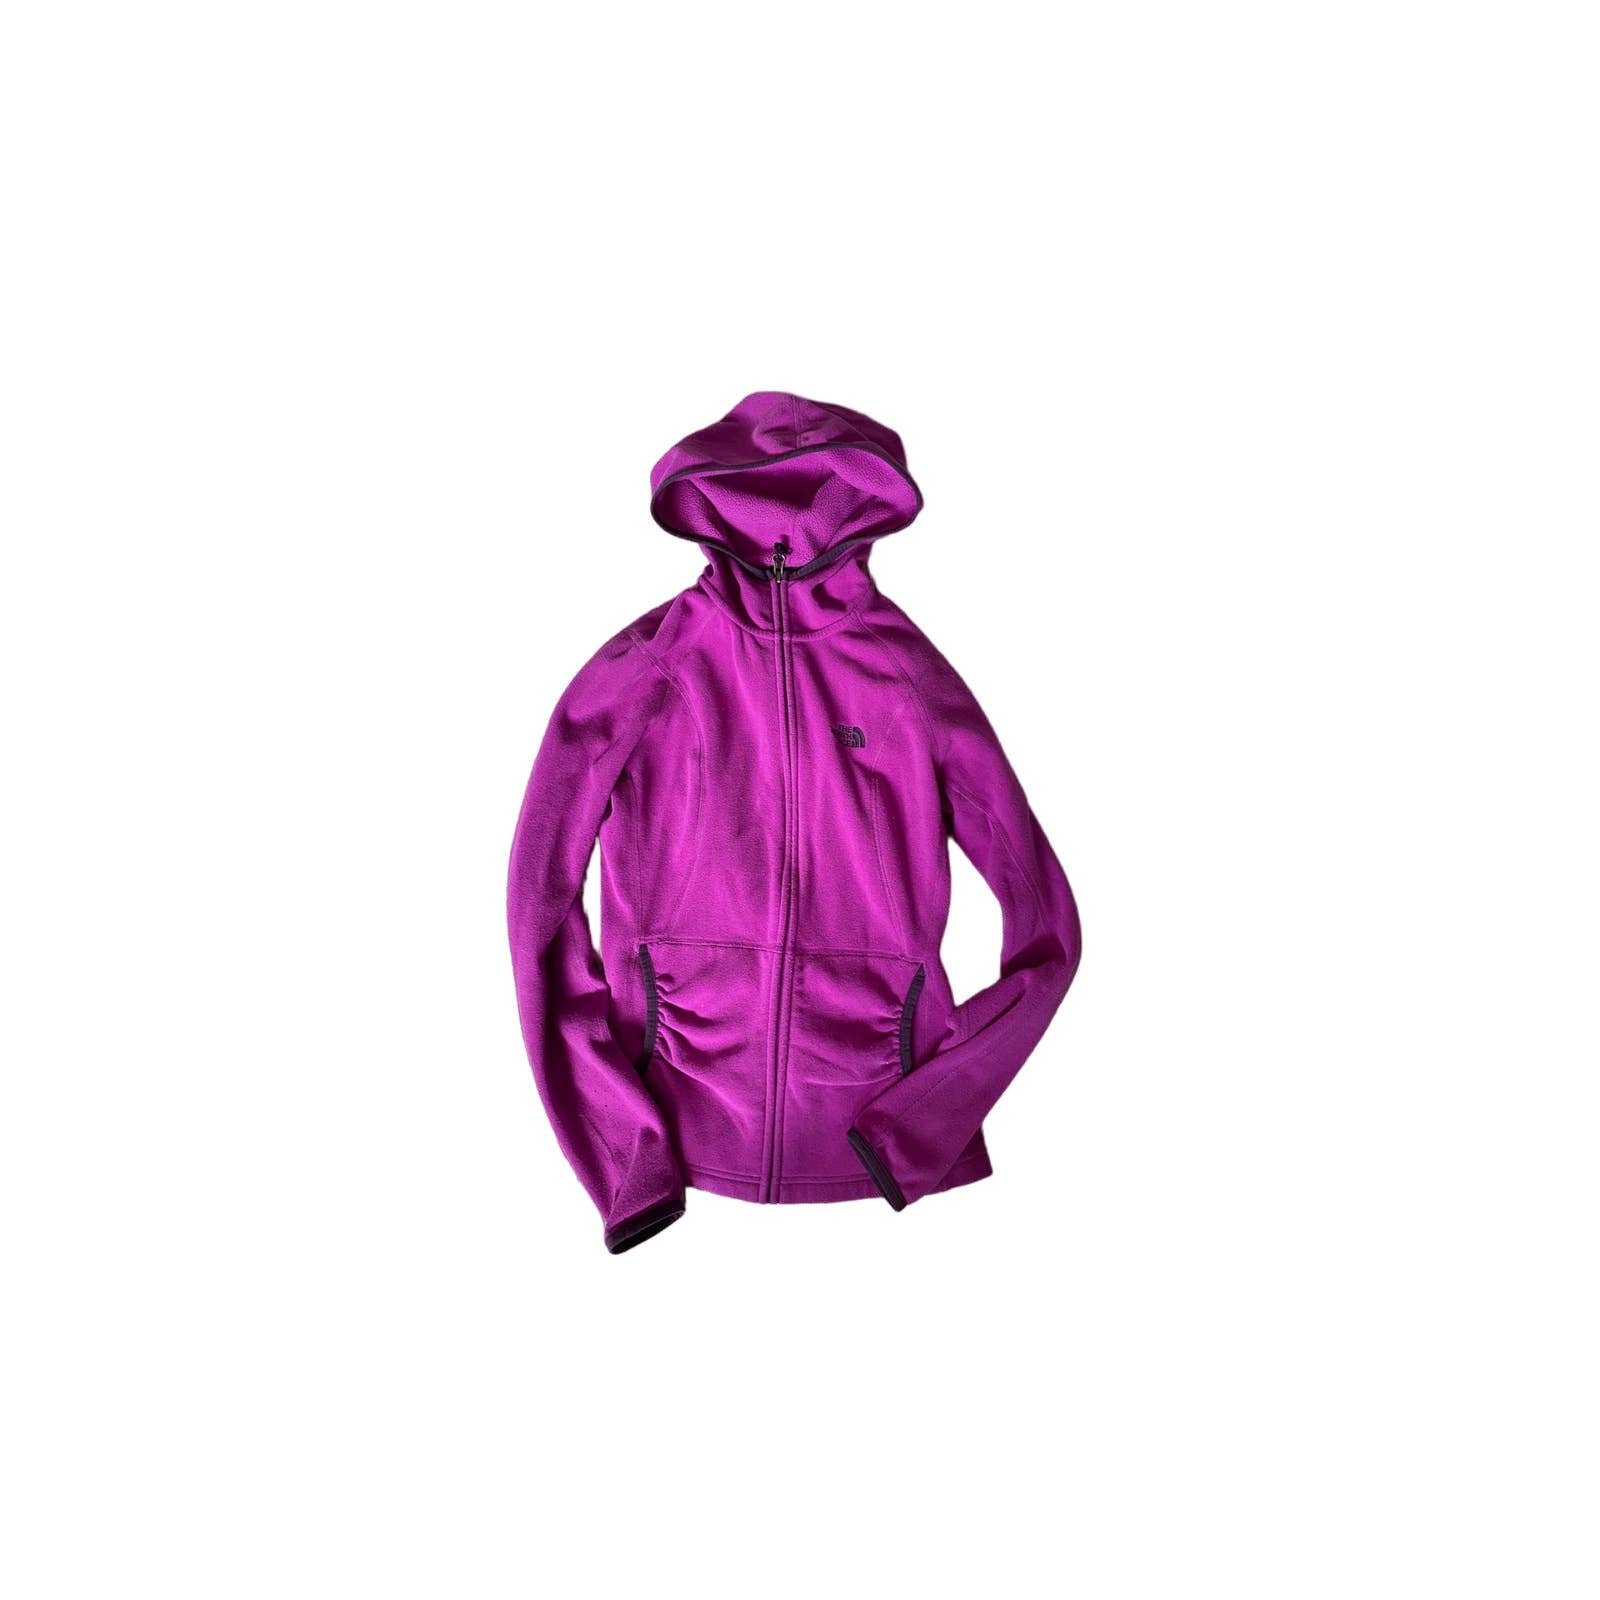 the Lowest price North Face Womens Purple Fleece Jacket small ObP3lp5RK no tax